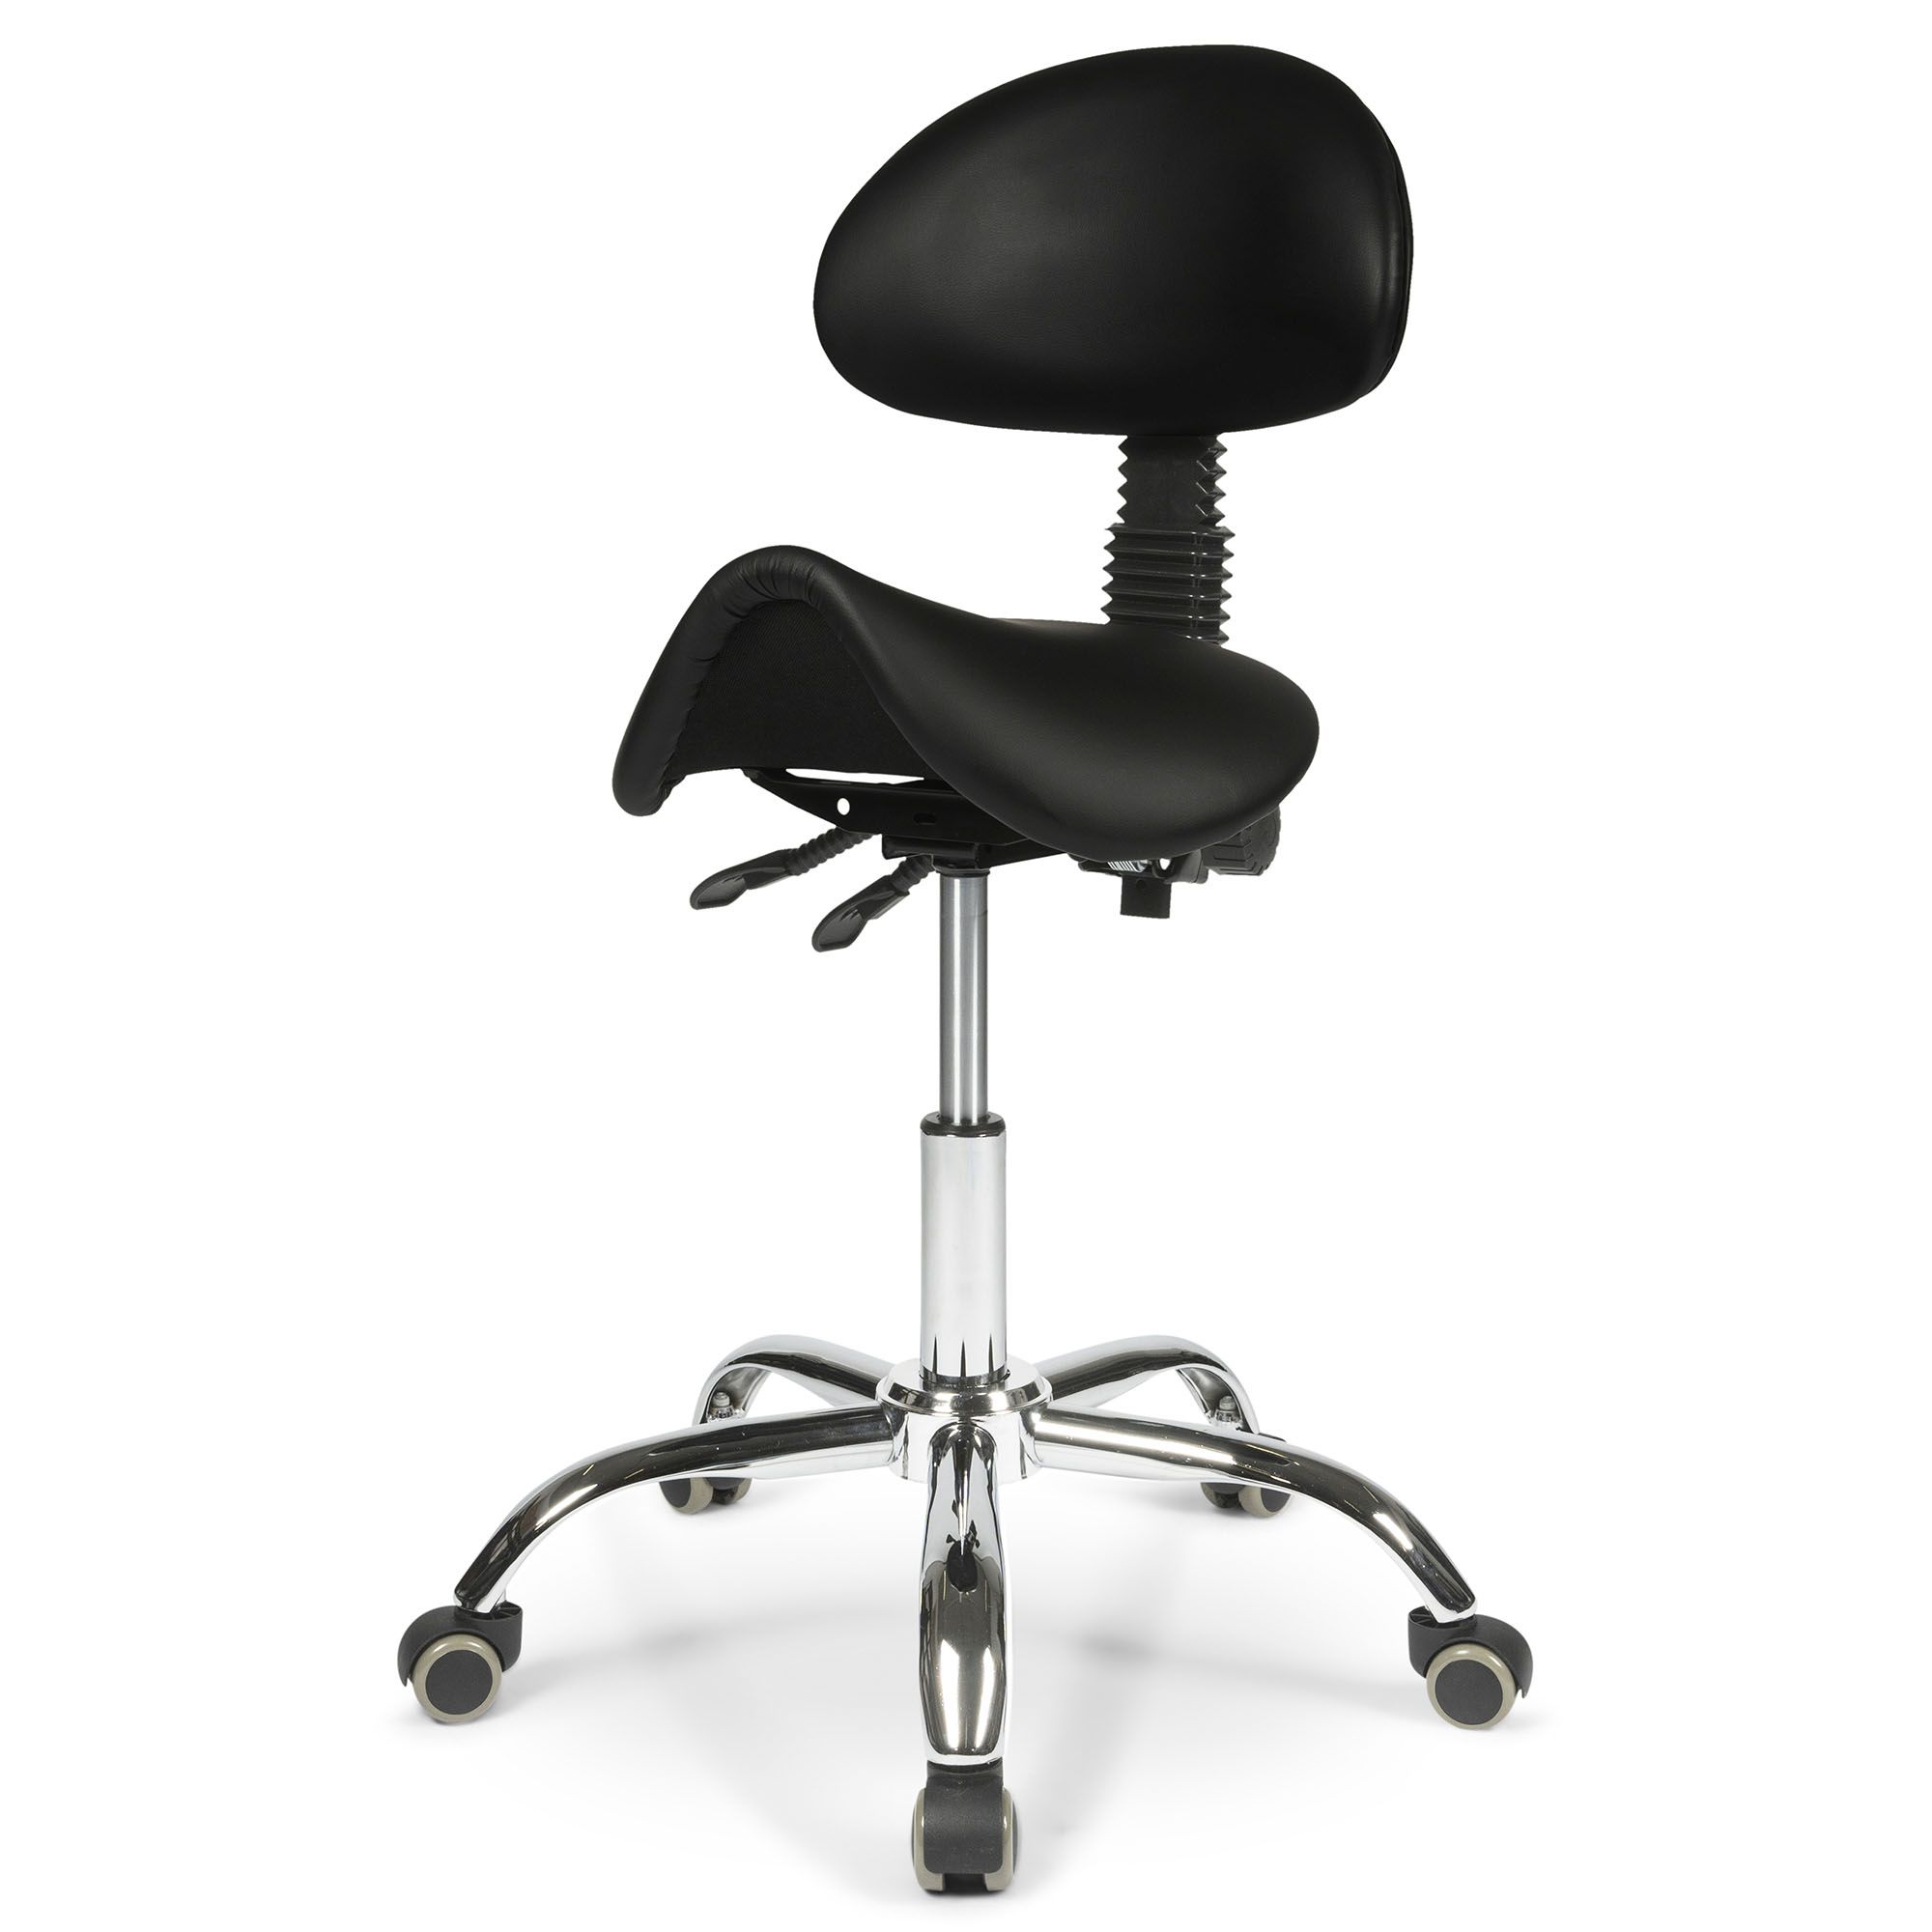 right side view of the dunimed ergonomic saddle stool with backrest